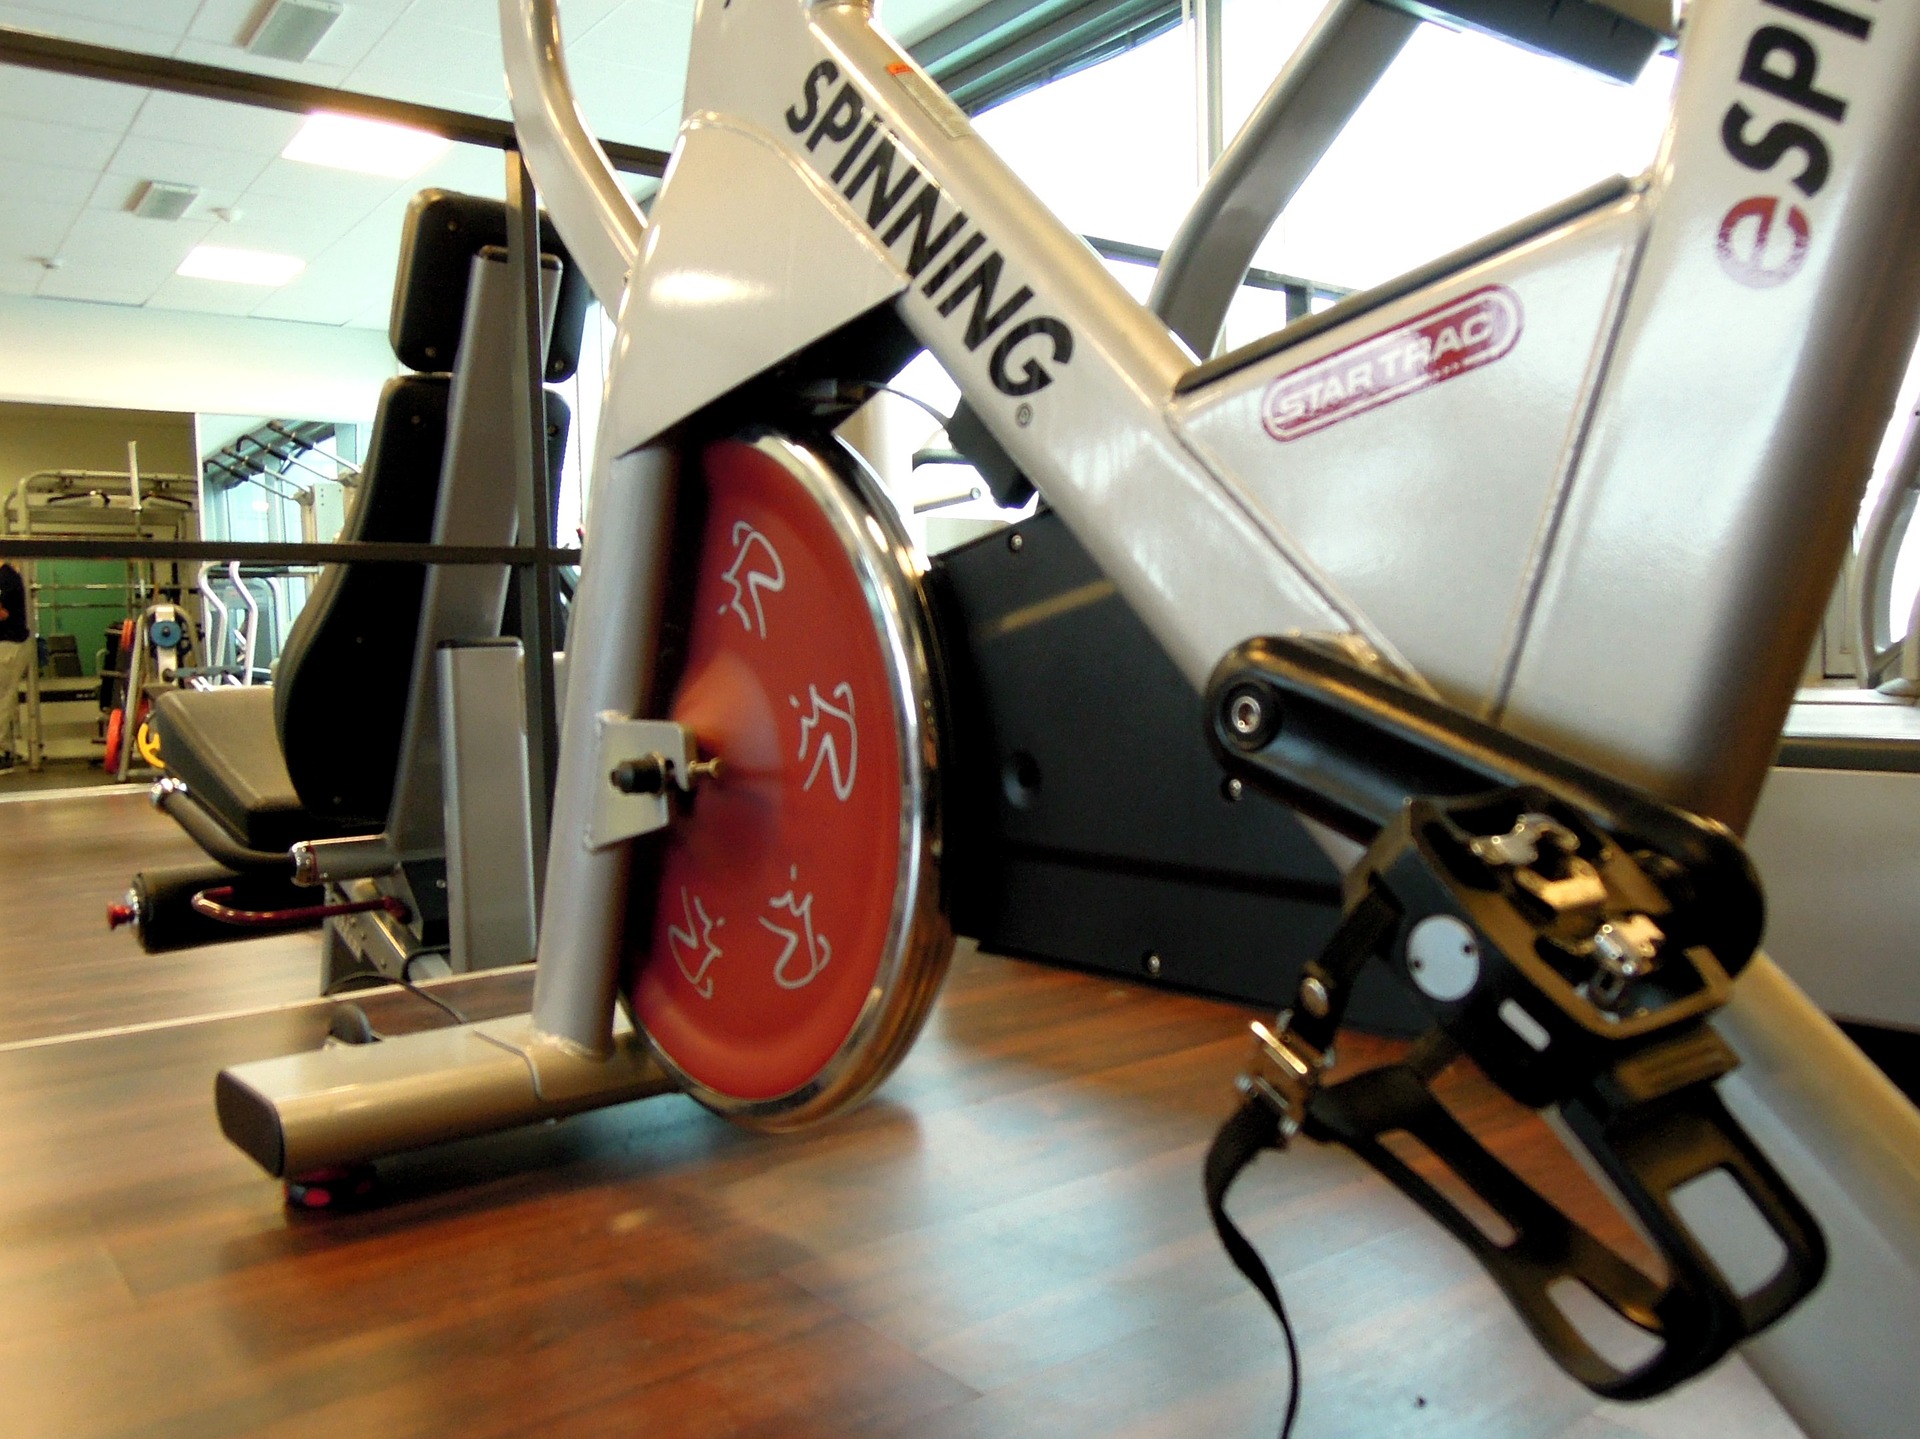 The Advantages of Using a Spin Bike